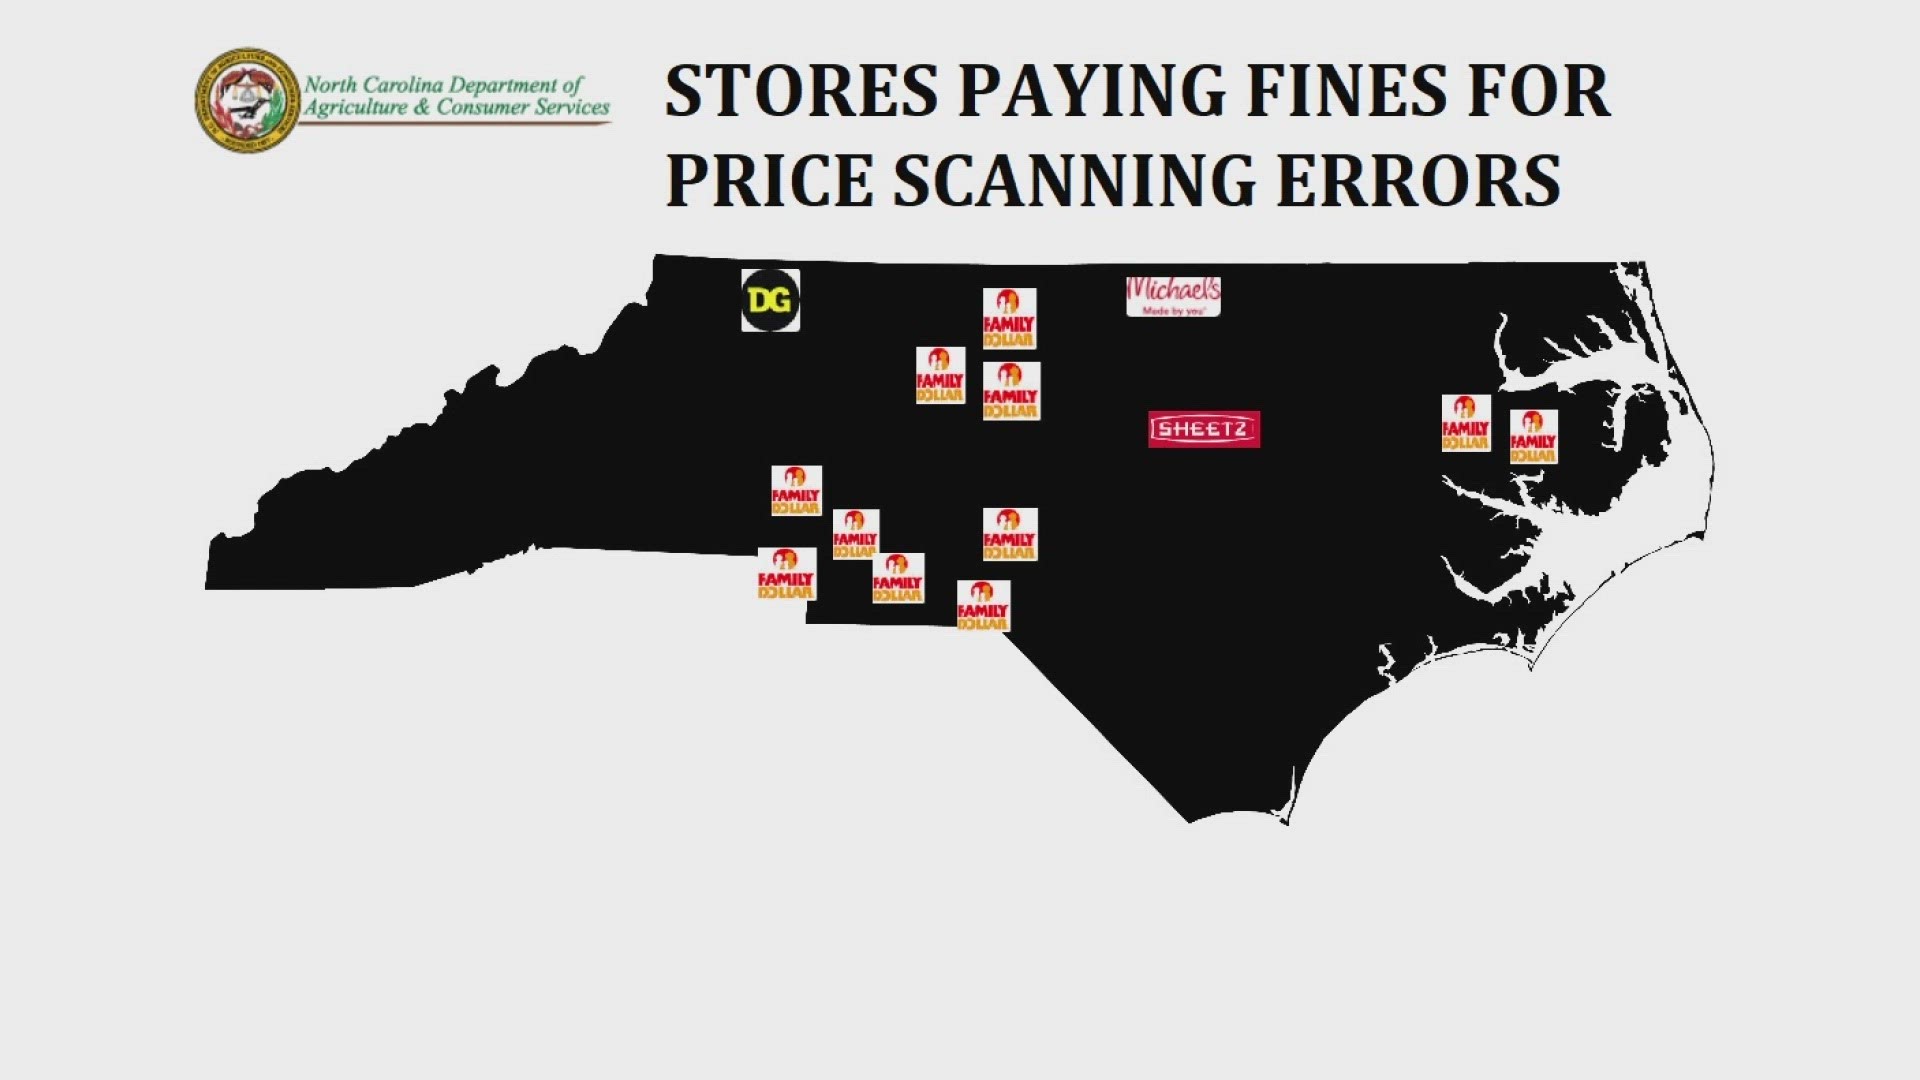 Some stores failed inspection multiple times, causing them to rack up tens of thousands of dollars in fines.